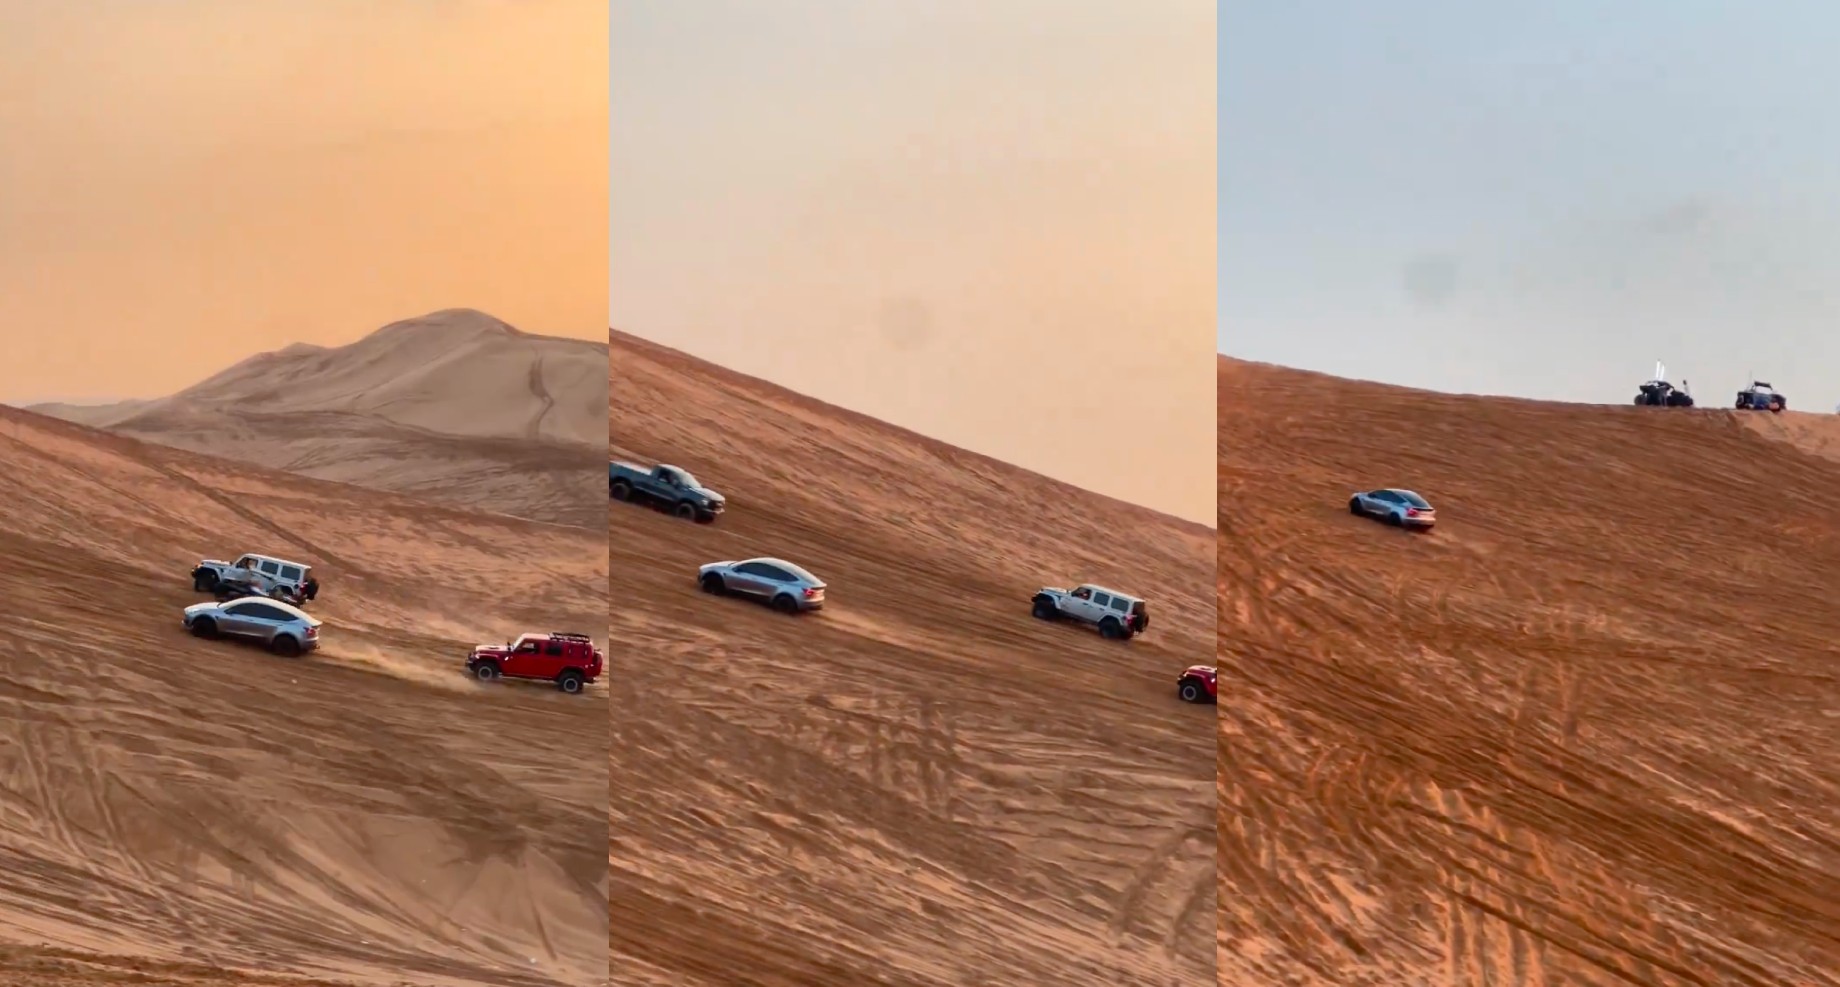 Tesla Model Y surprises by overtaking Jeeps in quick sand dune climb